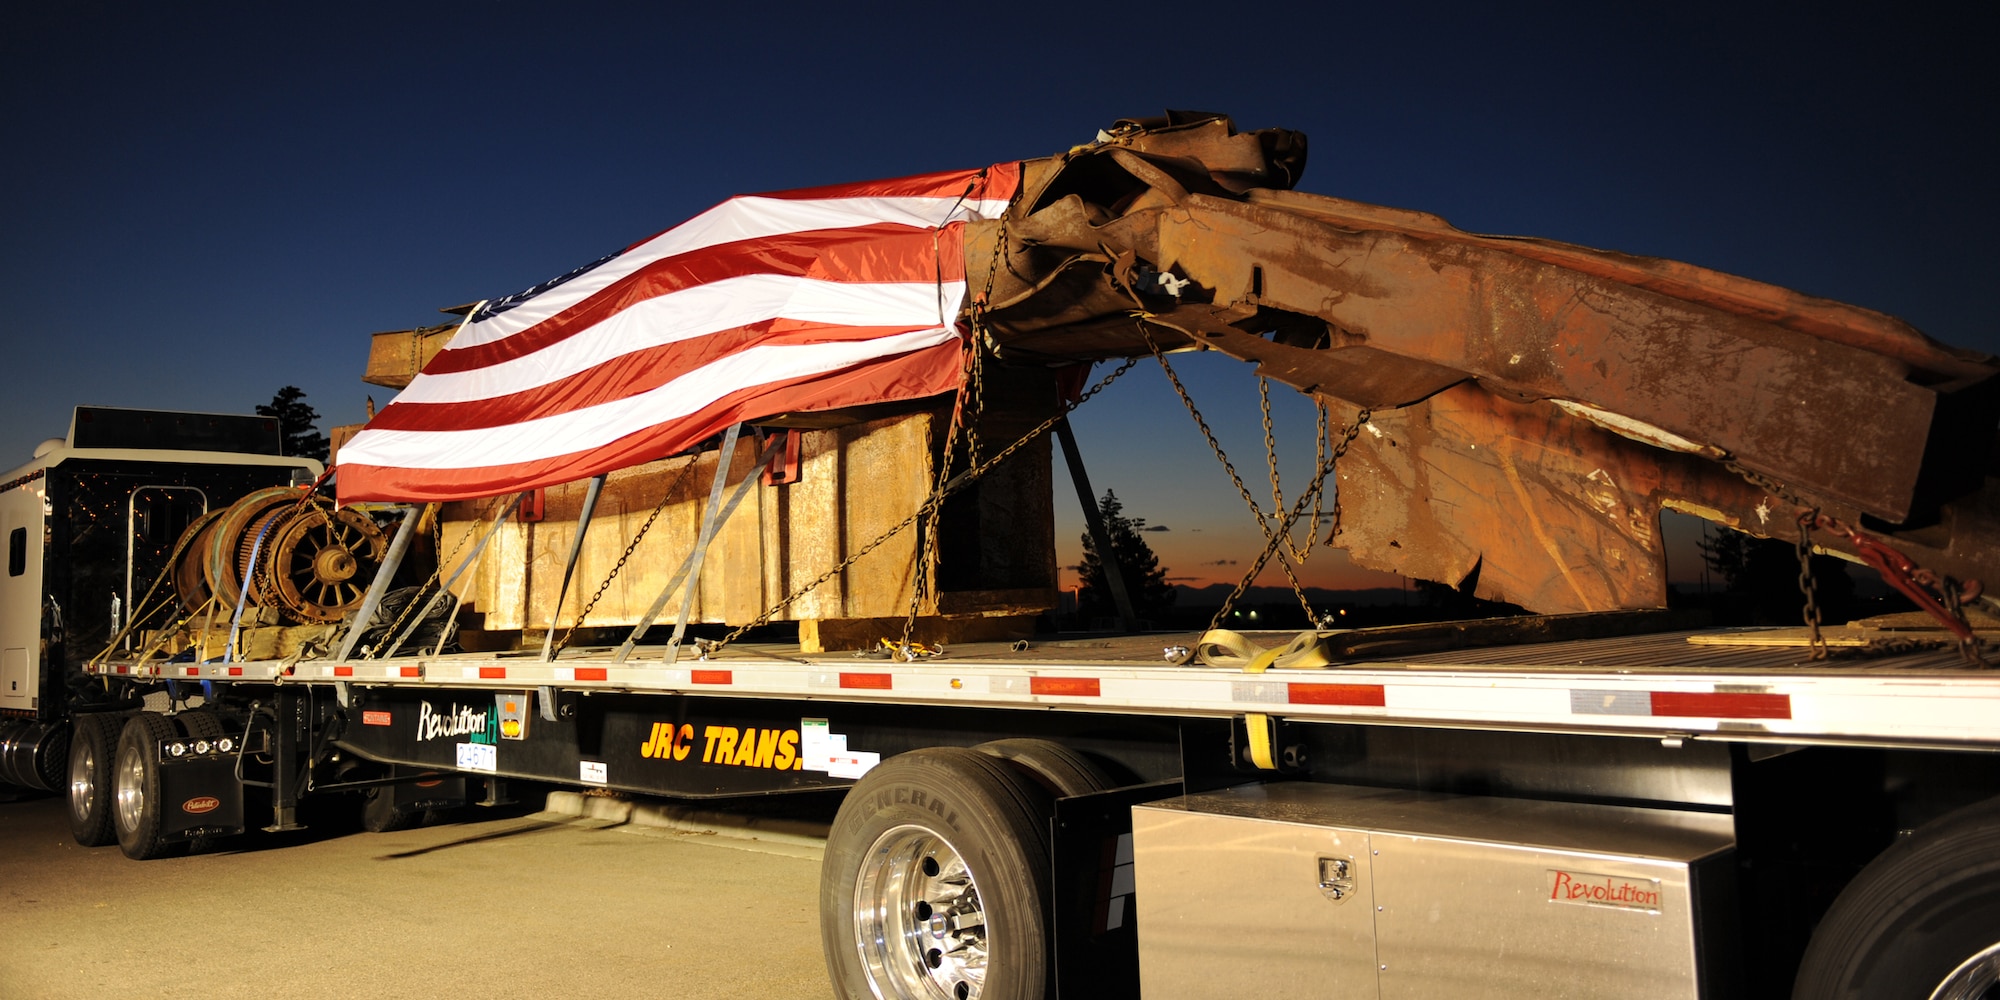 BUCKLEY AIR FORCE BASE, Colo. --  A flag drapes pieces of steel from the top five floors of the World Trade Center Aug. 7, 2011. Resting at Buckley AFB, pieces from the Port Authority of New York and New Jersey are being transported across the nation to commemorate the 10th anniversary of 9/11. (U.S. Air Force photo by Senior Airman Marcy Glass)
